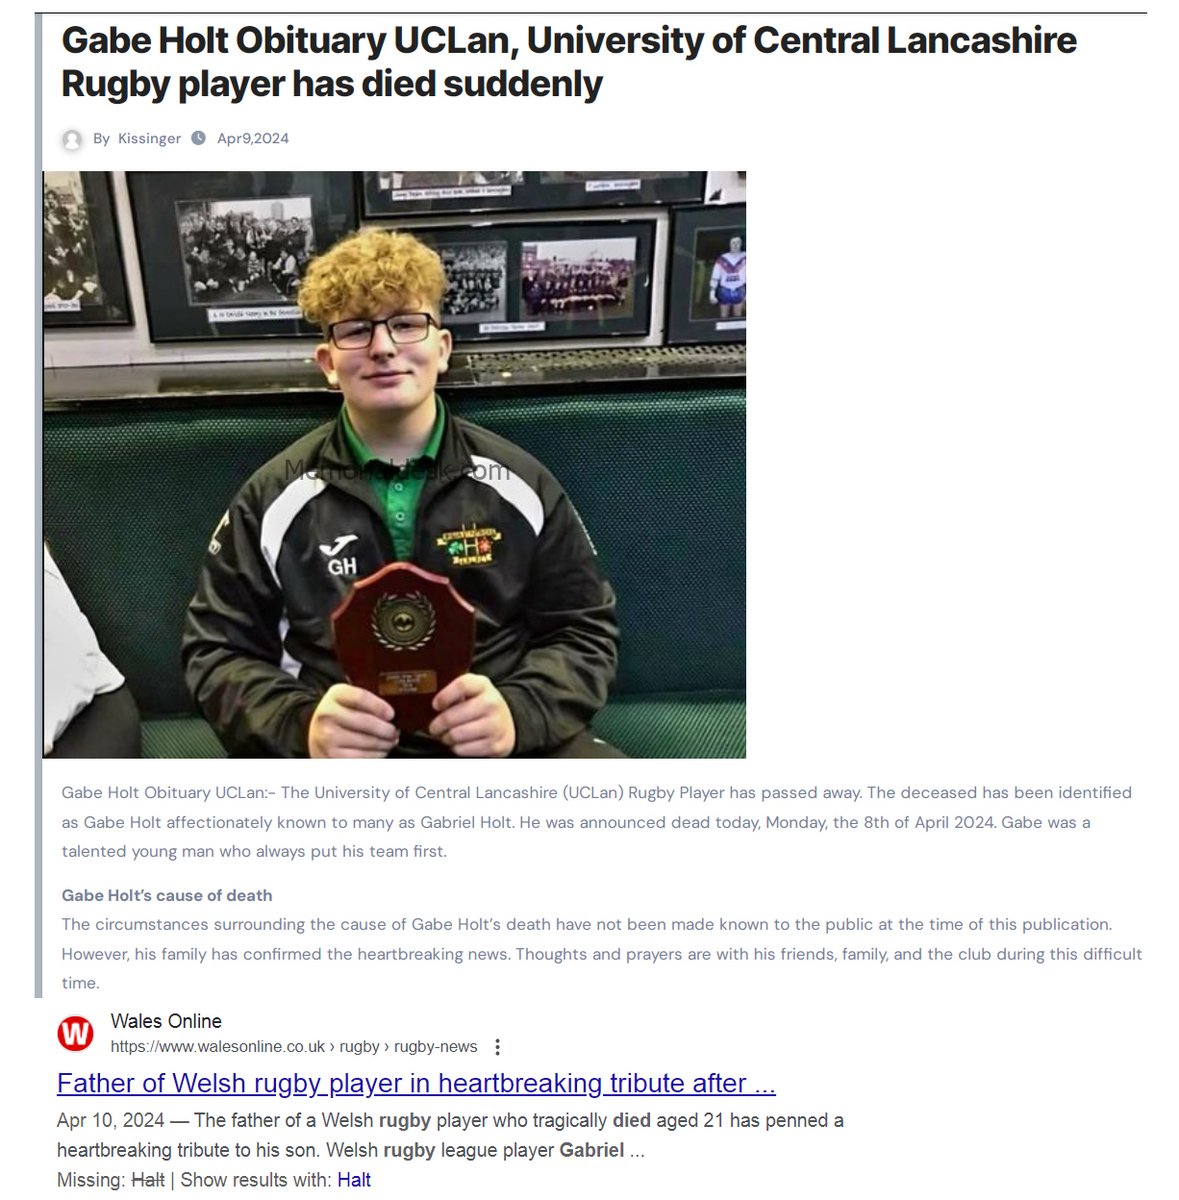 Wales - 21 year old Gabe Holt, University of Central Lancashire Rugby player, died suddenly on April 8, 2024. Cause of death not reported. COVID-19 mRNA Vaccine sudden deaths are at an all time high #DiedSuddenly